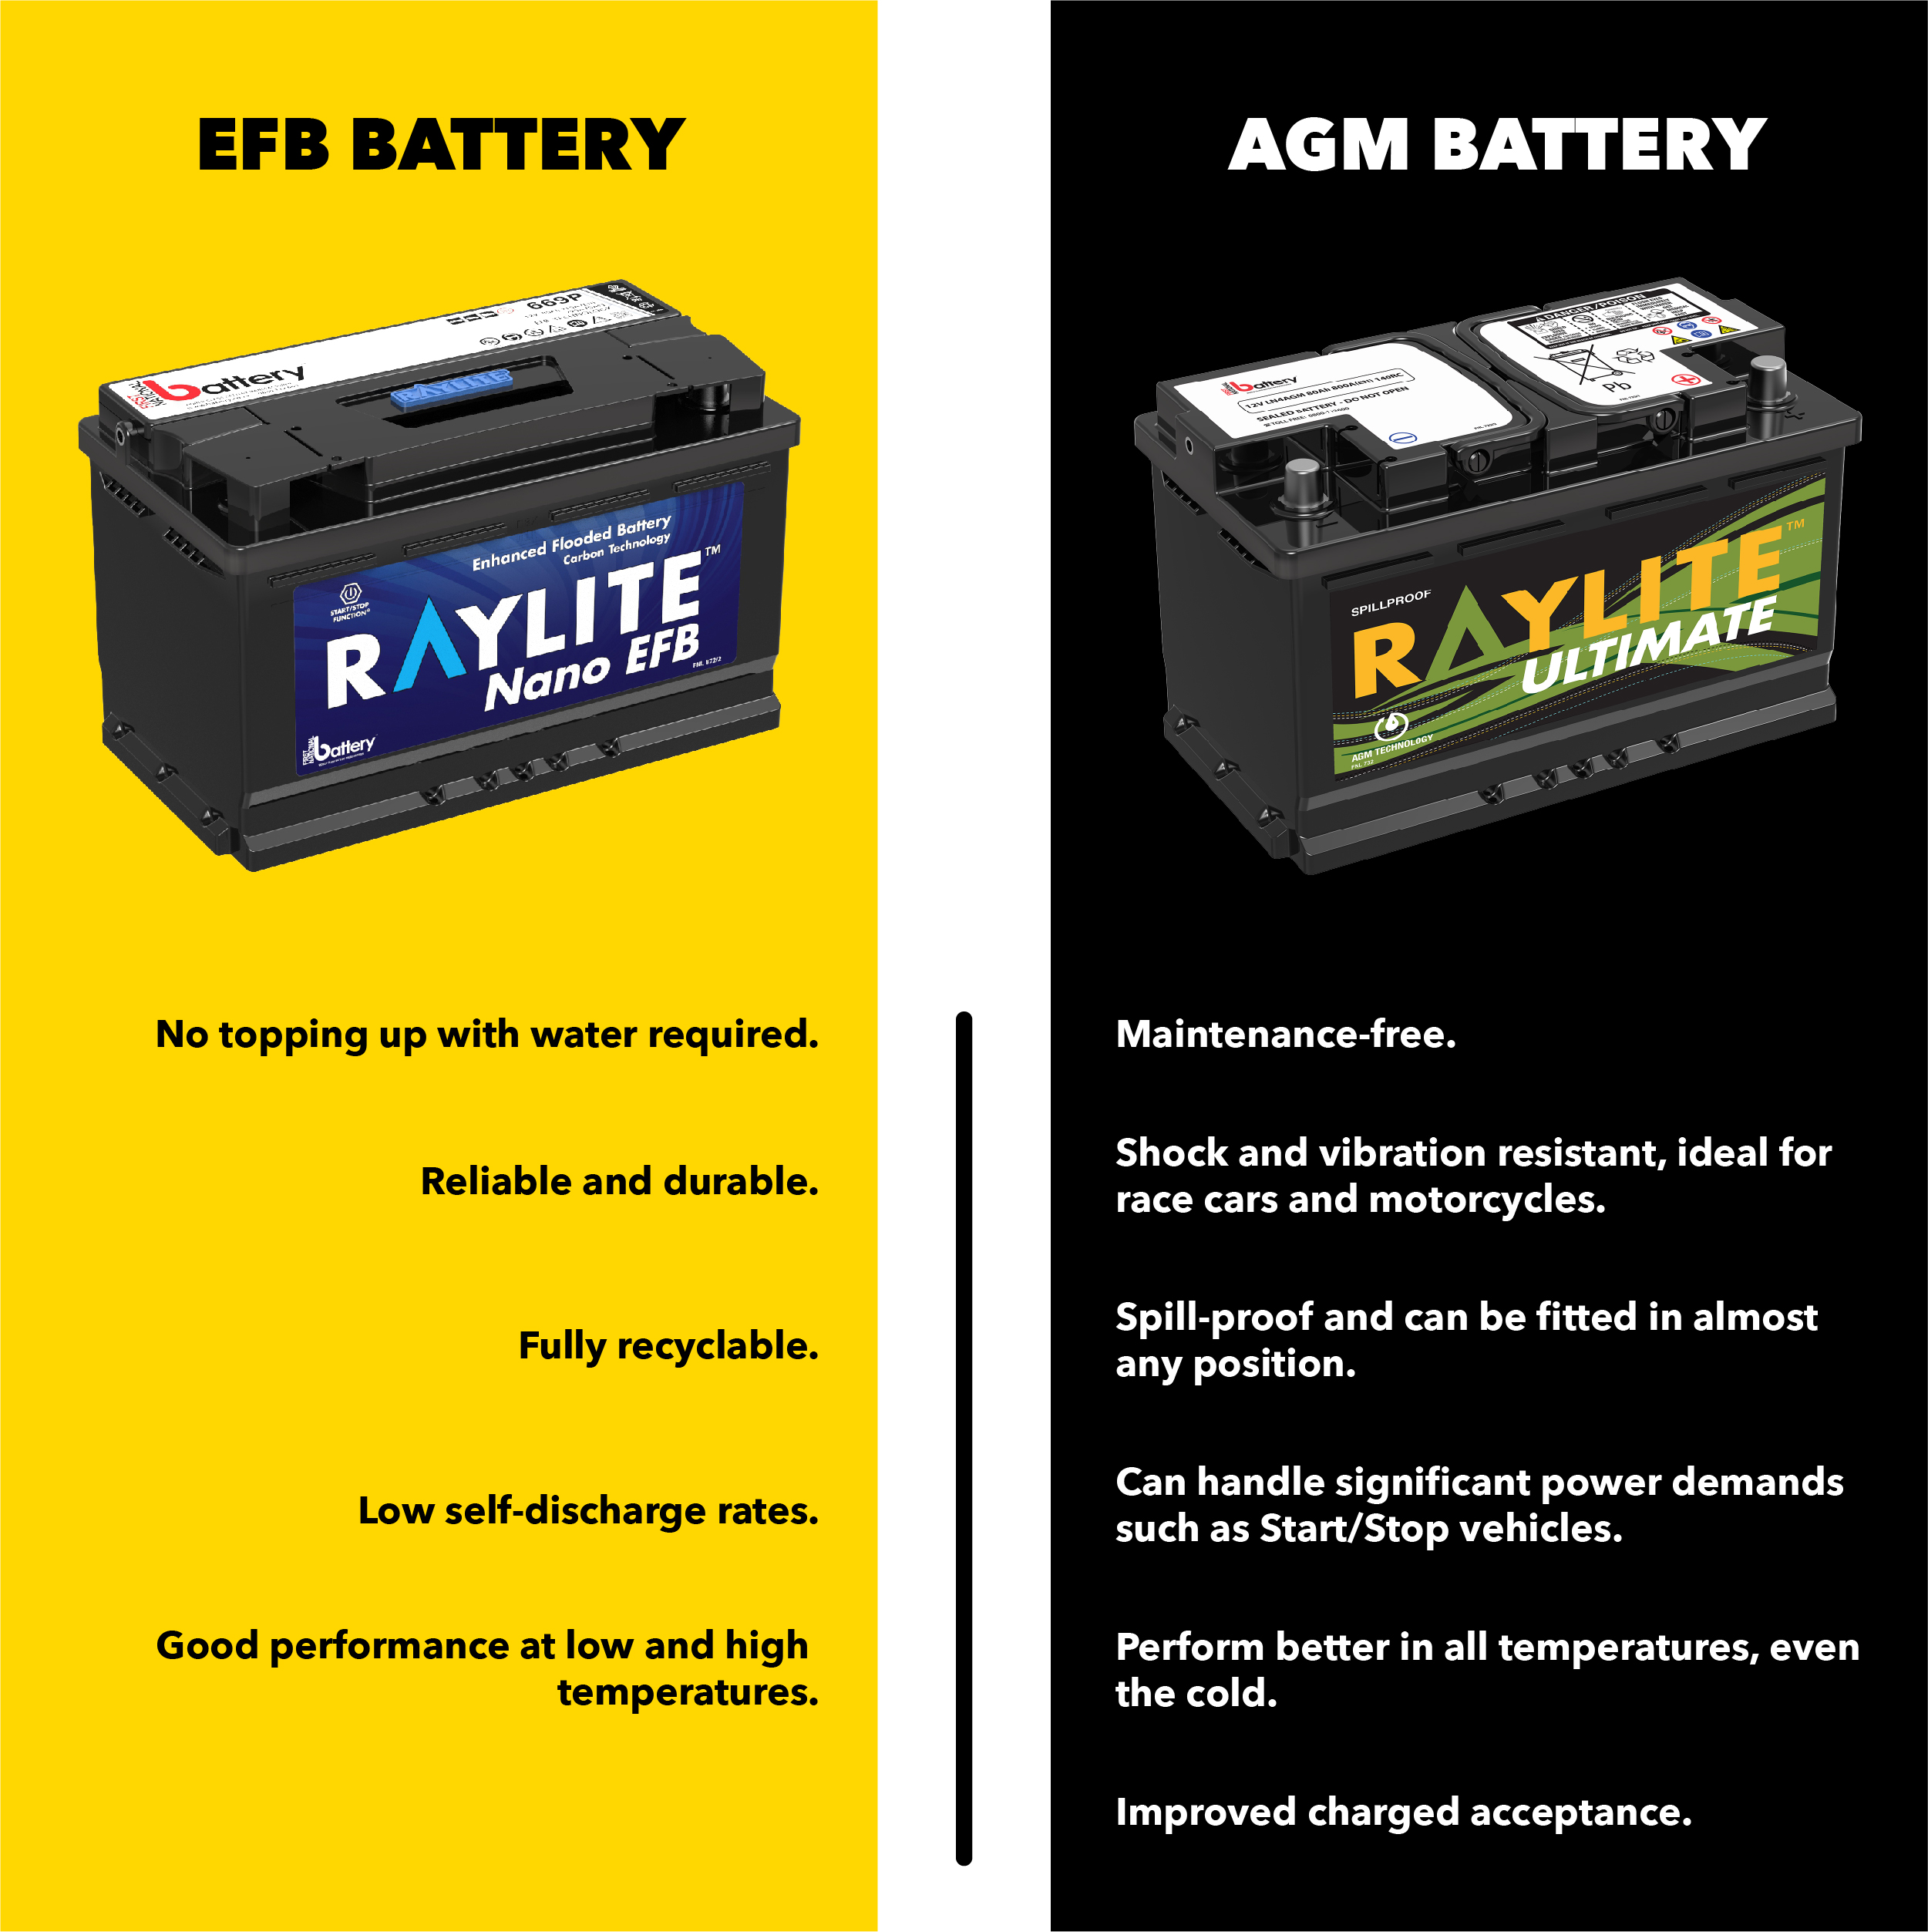 Standard lead-acid vs AGM: What's the right battery for a Start/Stop  vehicle?